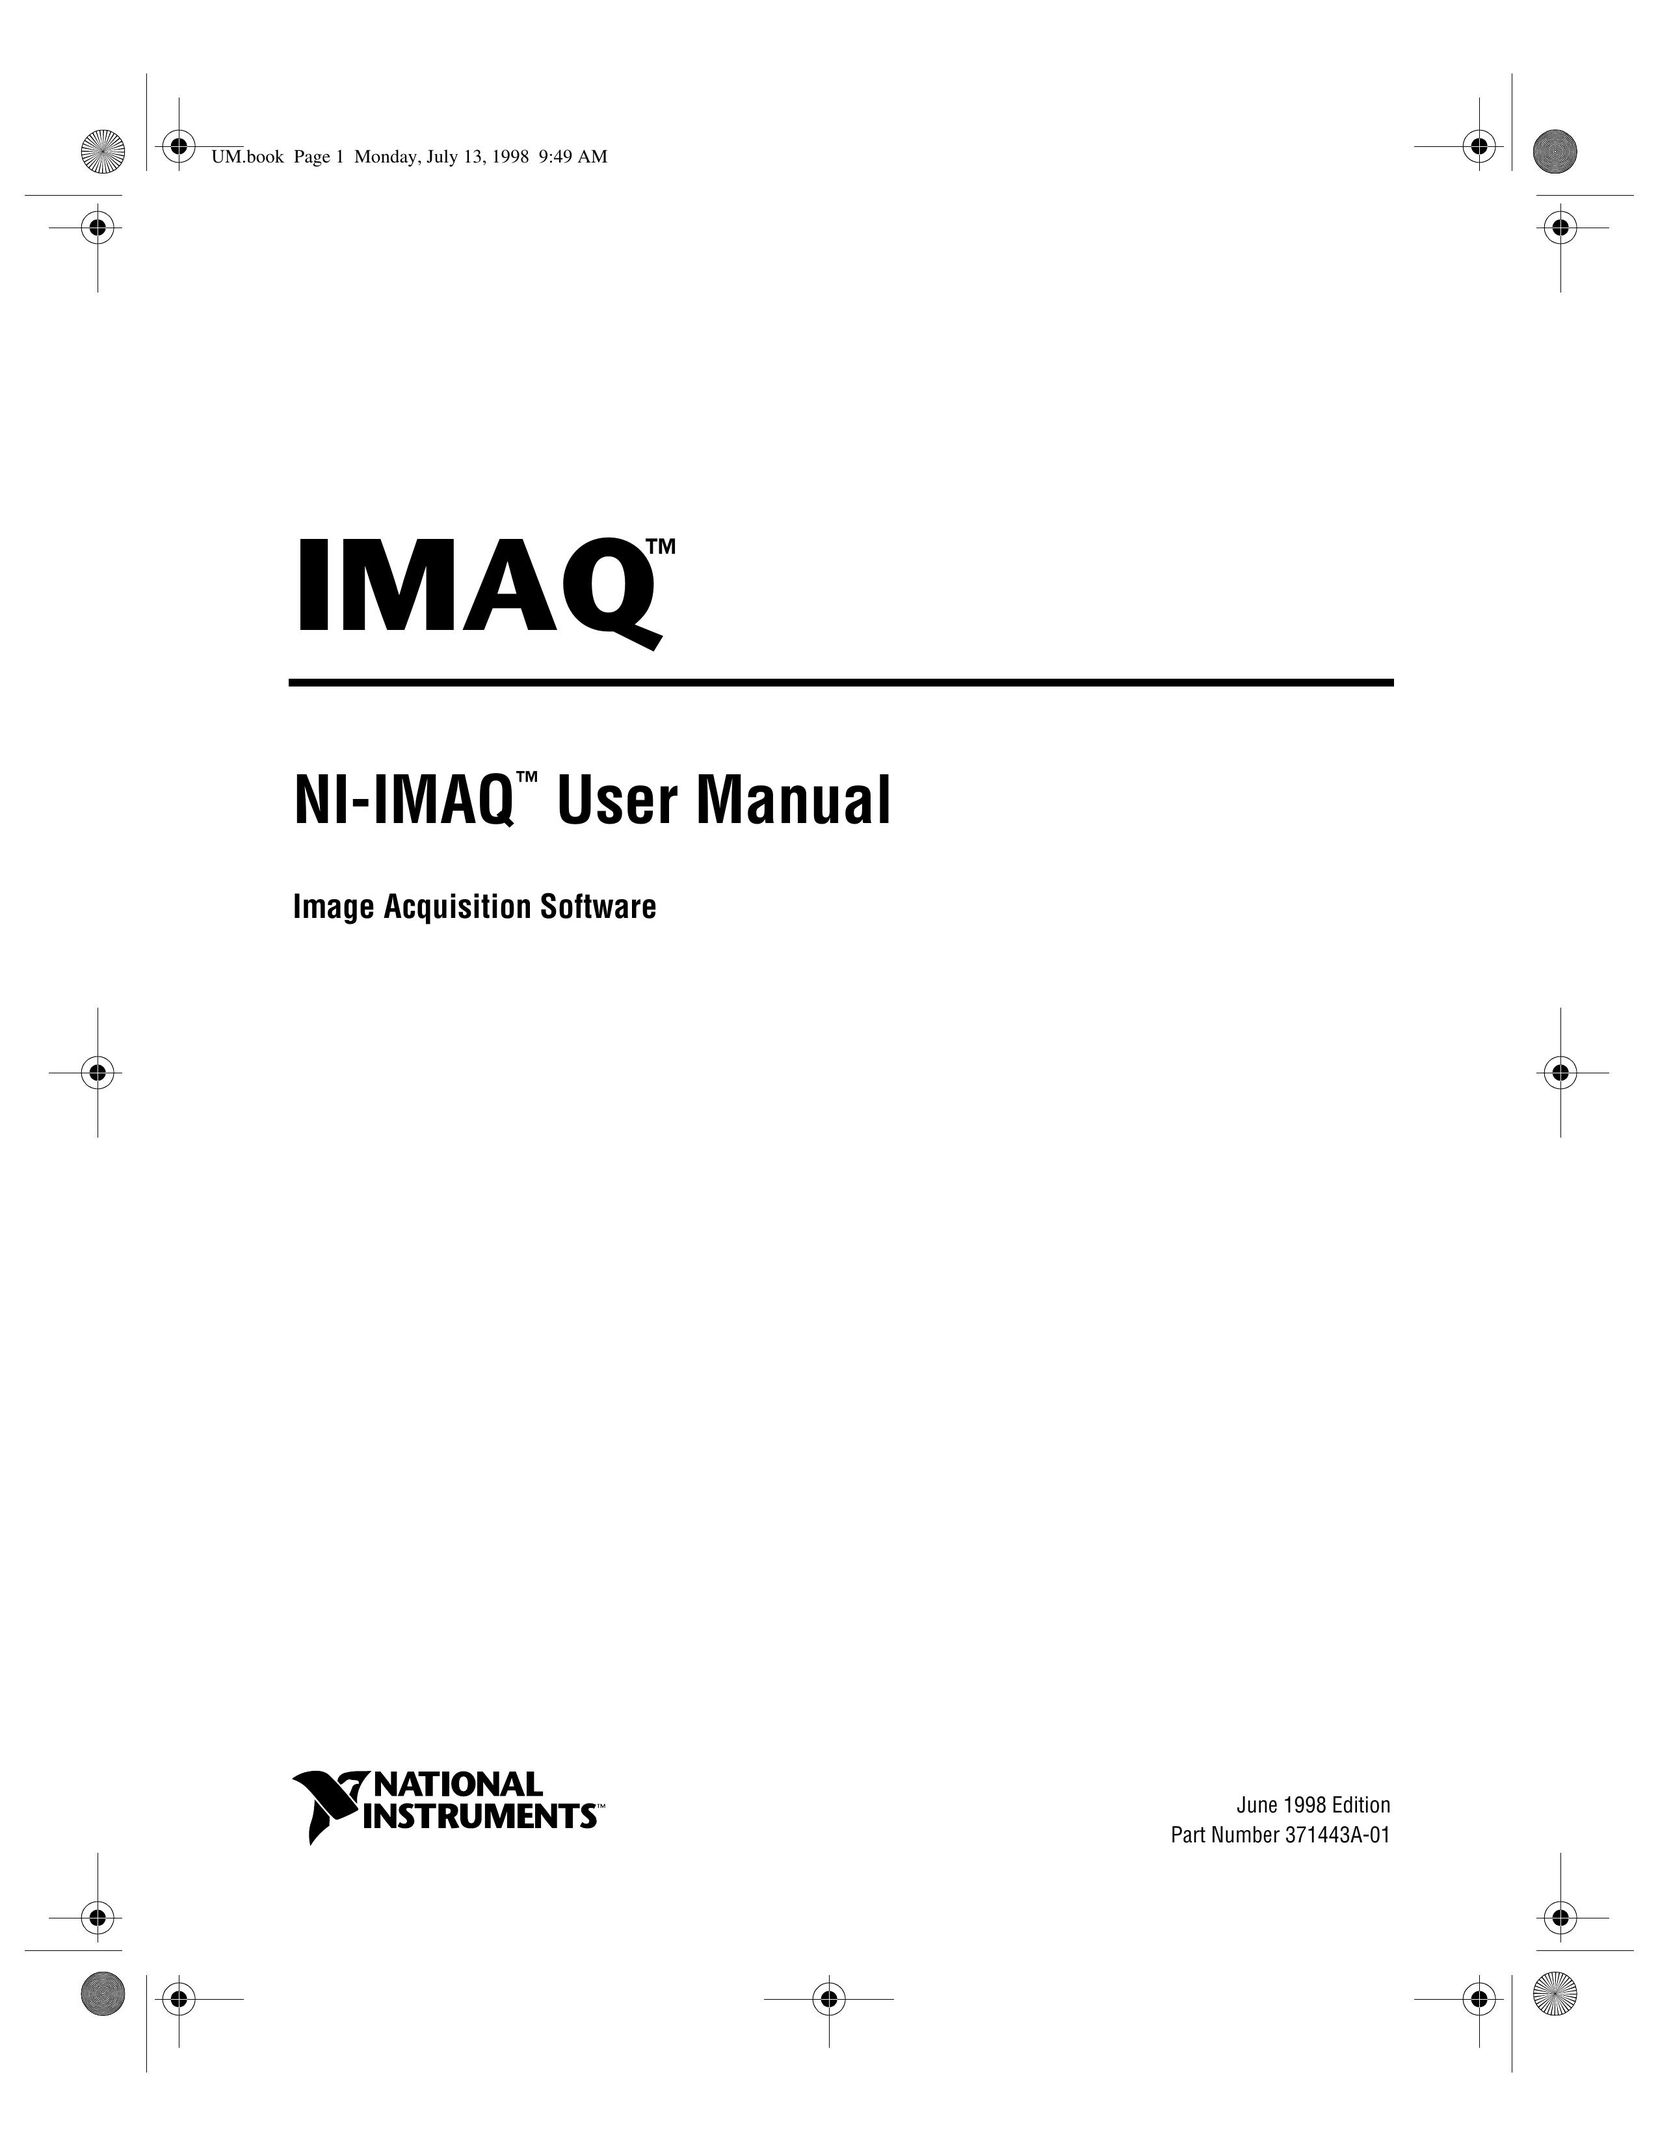 National Instruments Image Acquisition Software Network Card User Manual